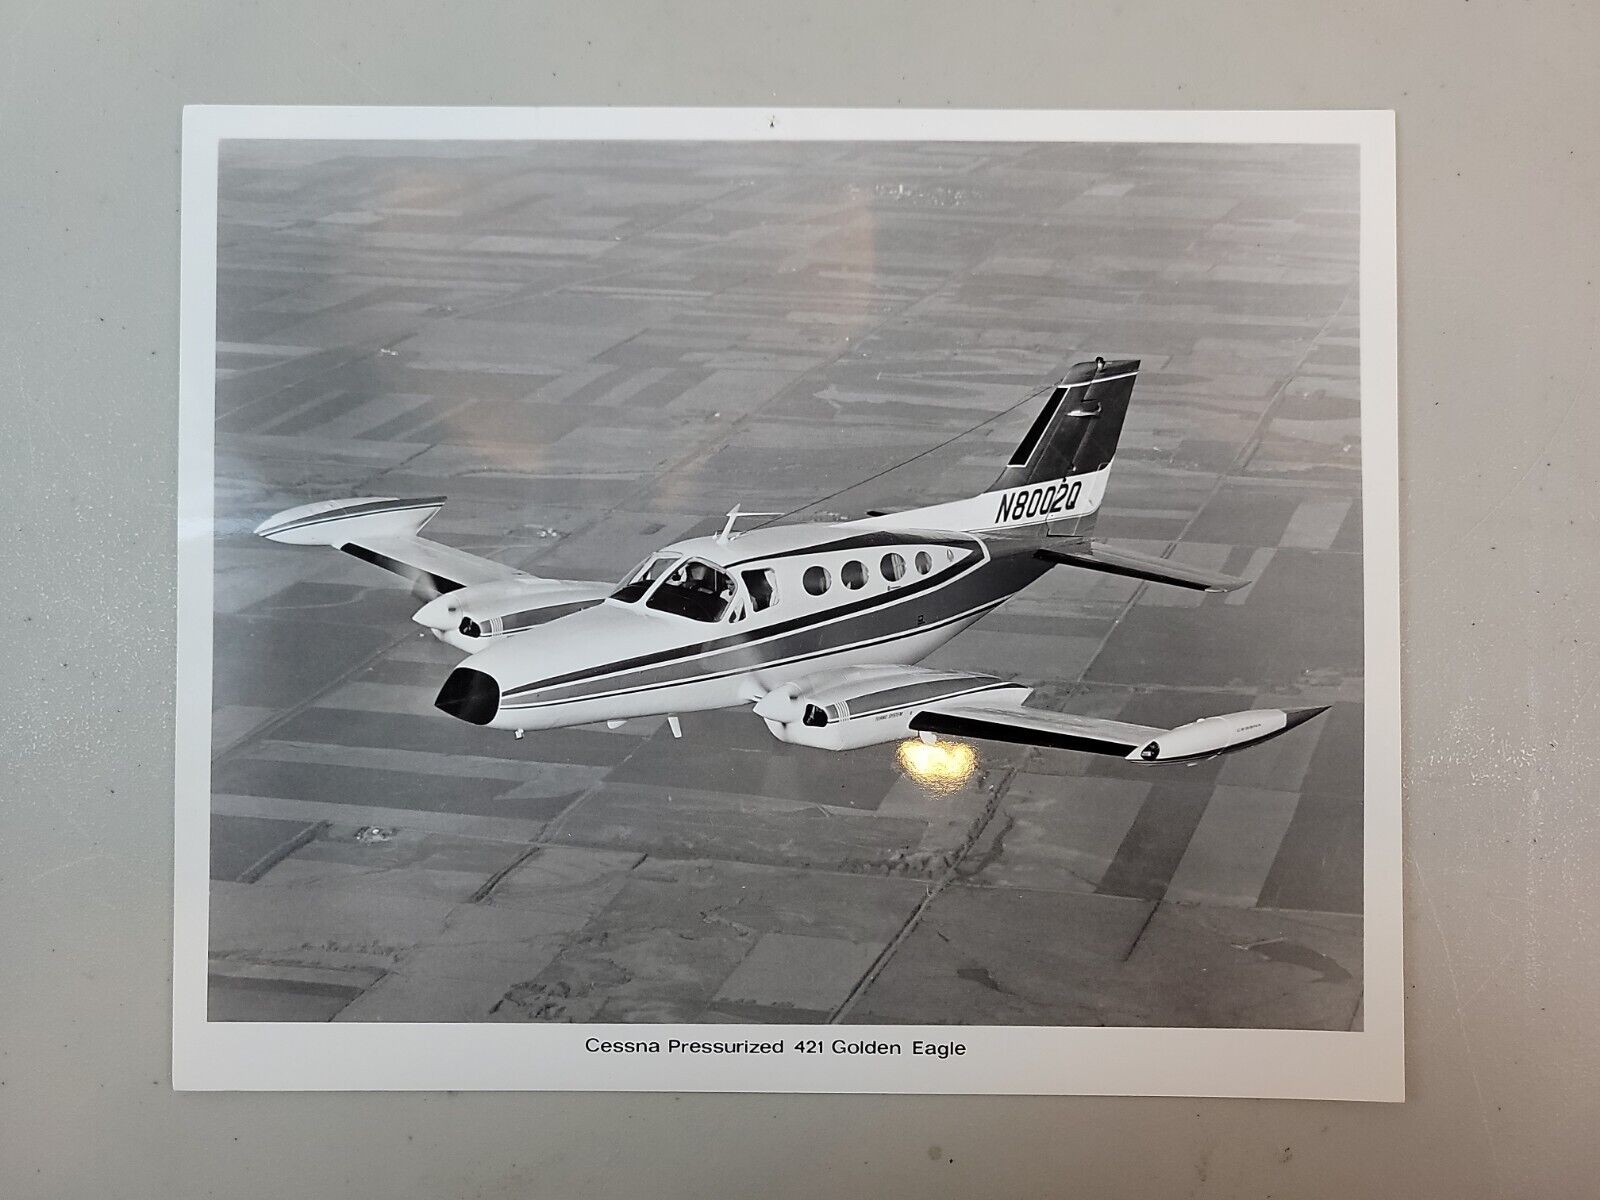 Cessna Pressurized 421 Golden Eagle Black and White Promotional 8x10 Photo